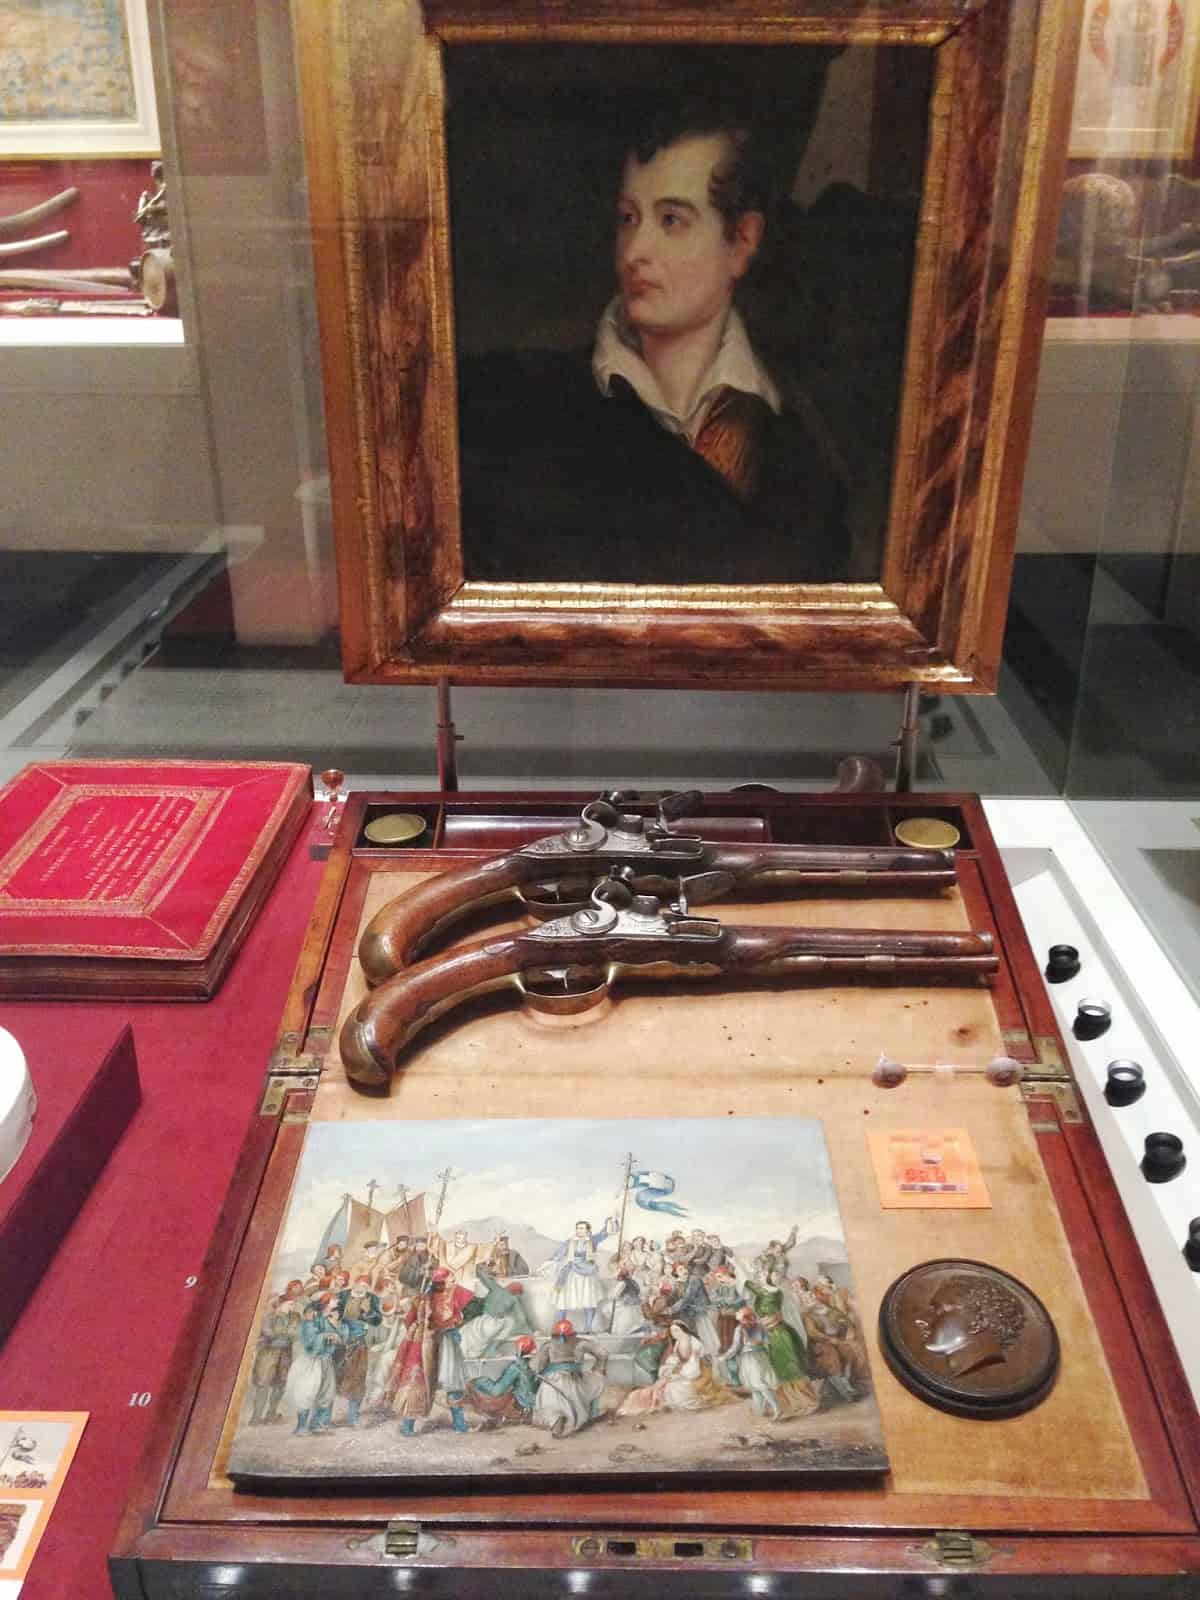 Lord Byron’s pistols at the Benaki Museum of Greek Culture in Athens, Greece